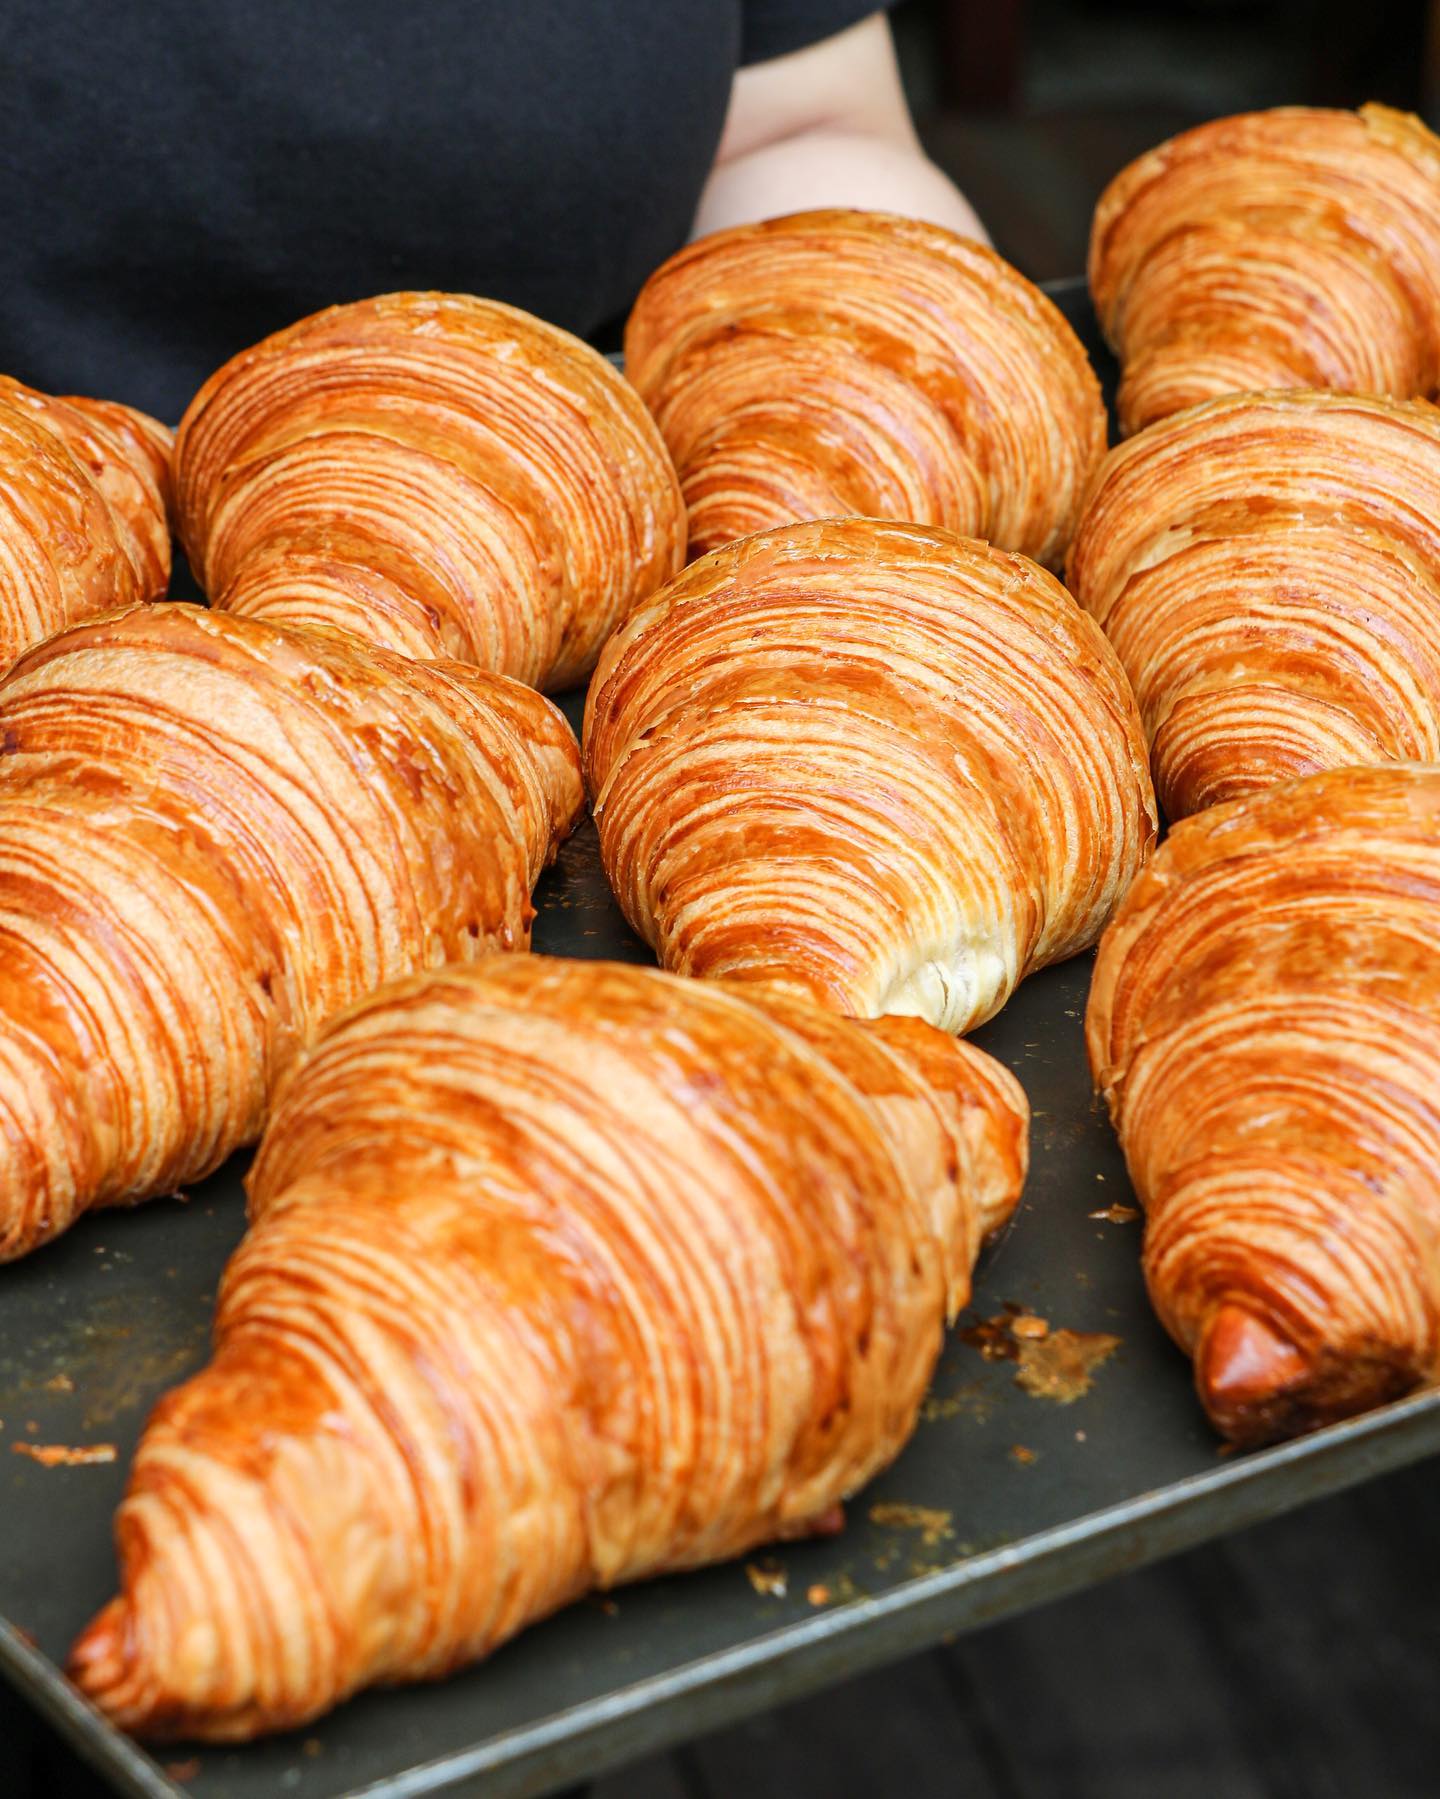 Tiong Bahru Bakery - Tray of croissants